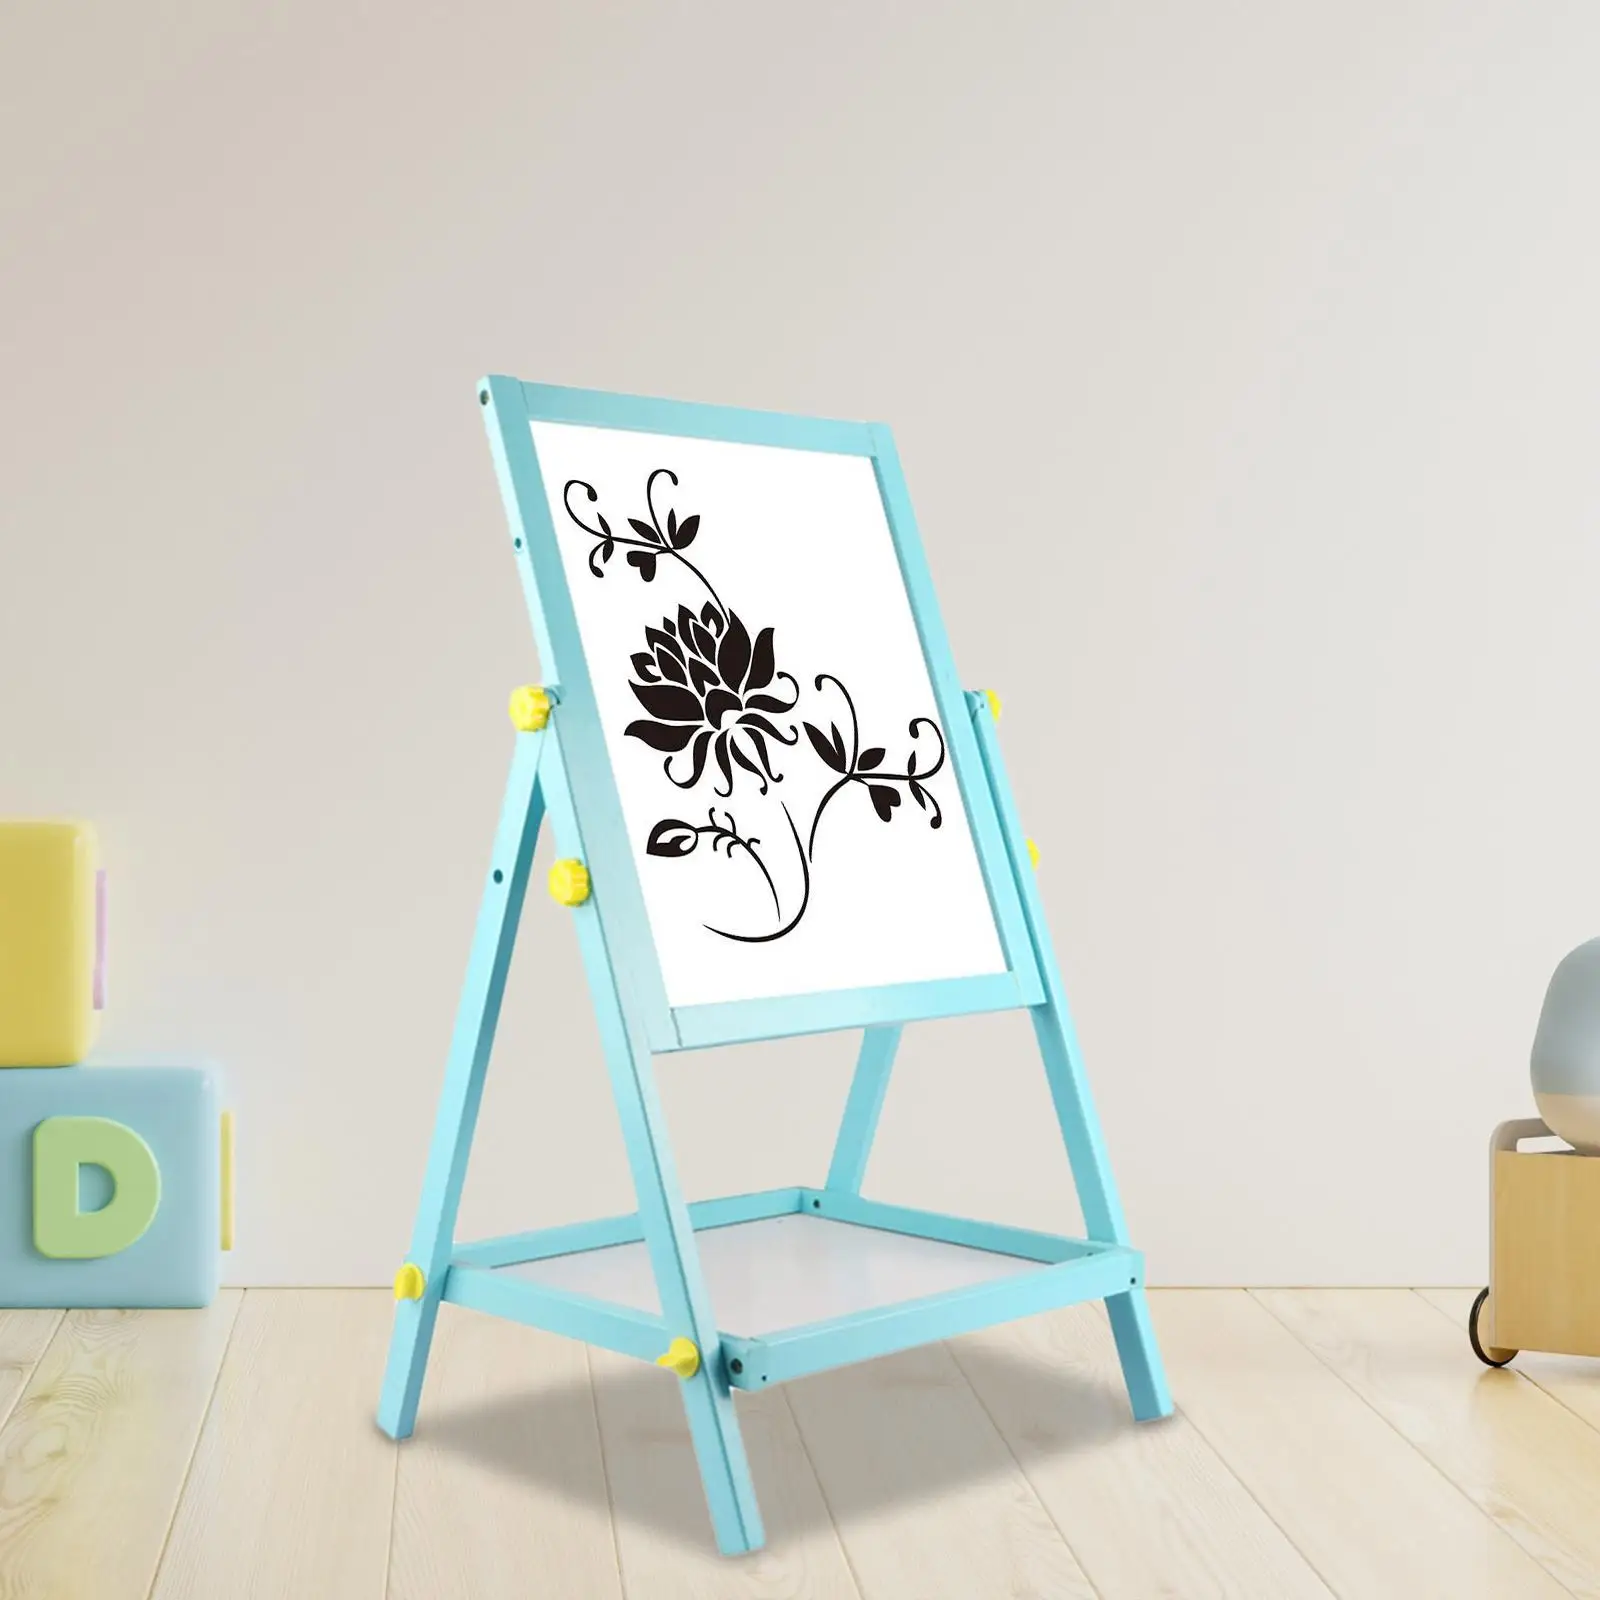 Standing Art Easel Double Sided Whiteboard Chalkboard Painting Accessories Wooden Learning Drawing Board for Children Girls Boys